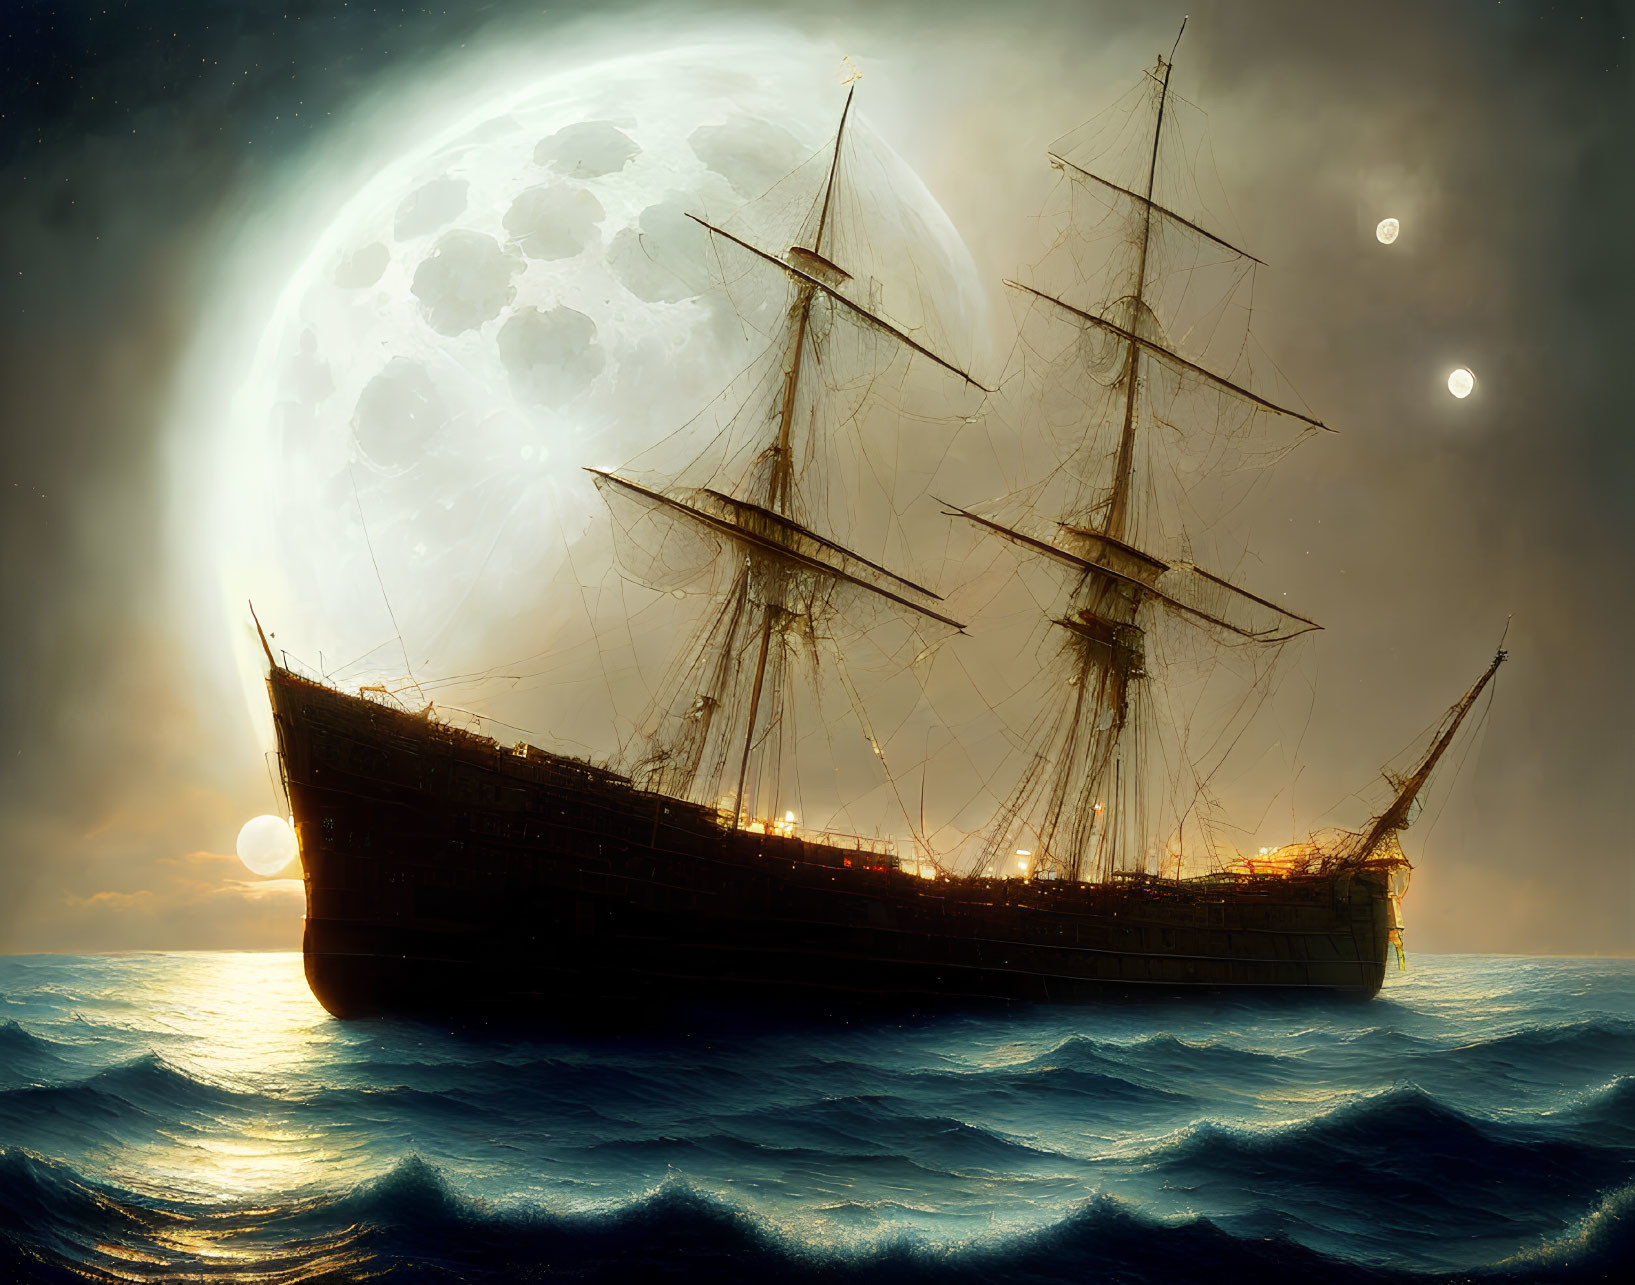 Sailing ship at sea under night sky with moon, stars, and sunset hint